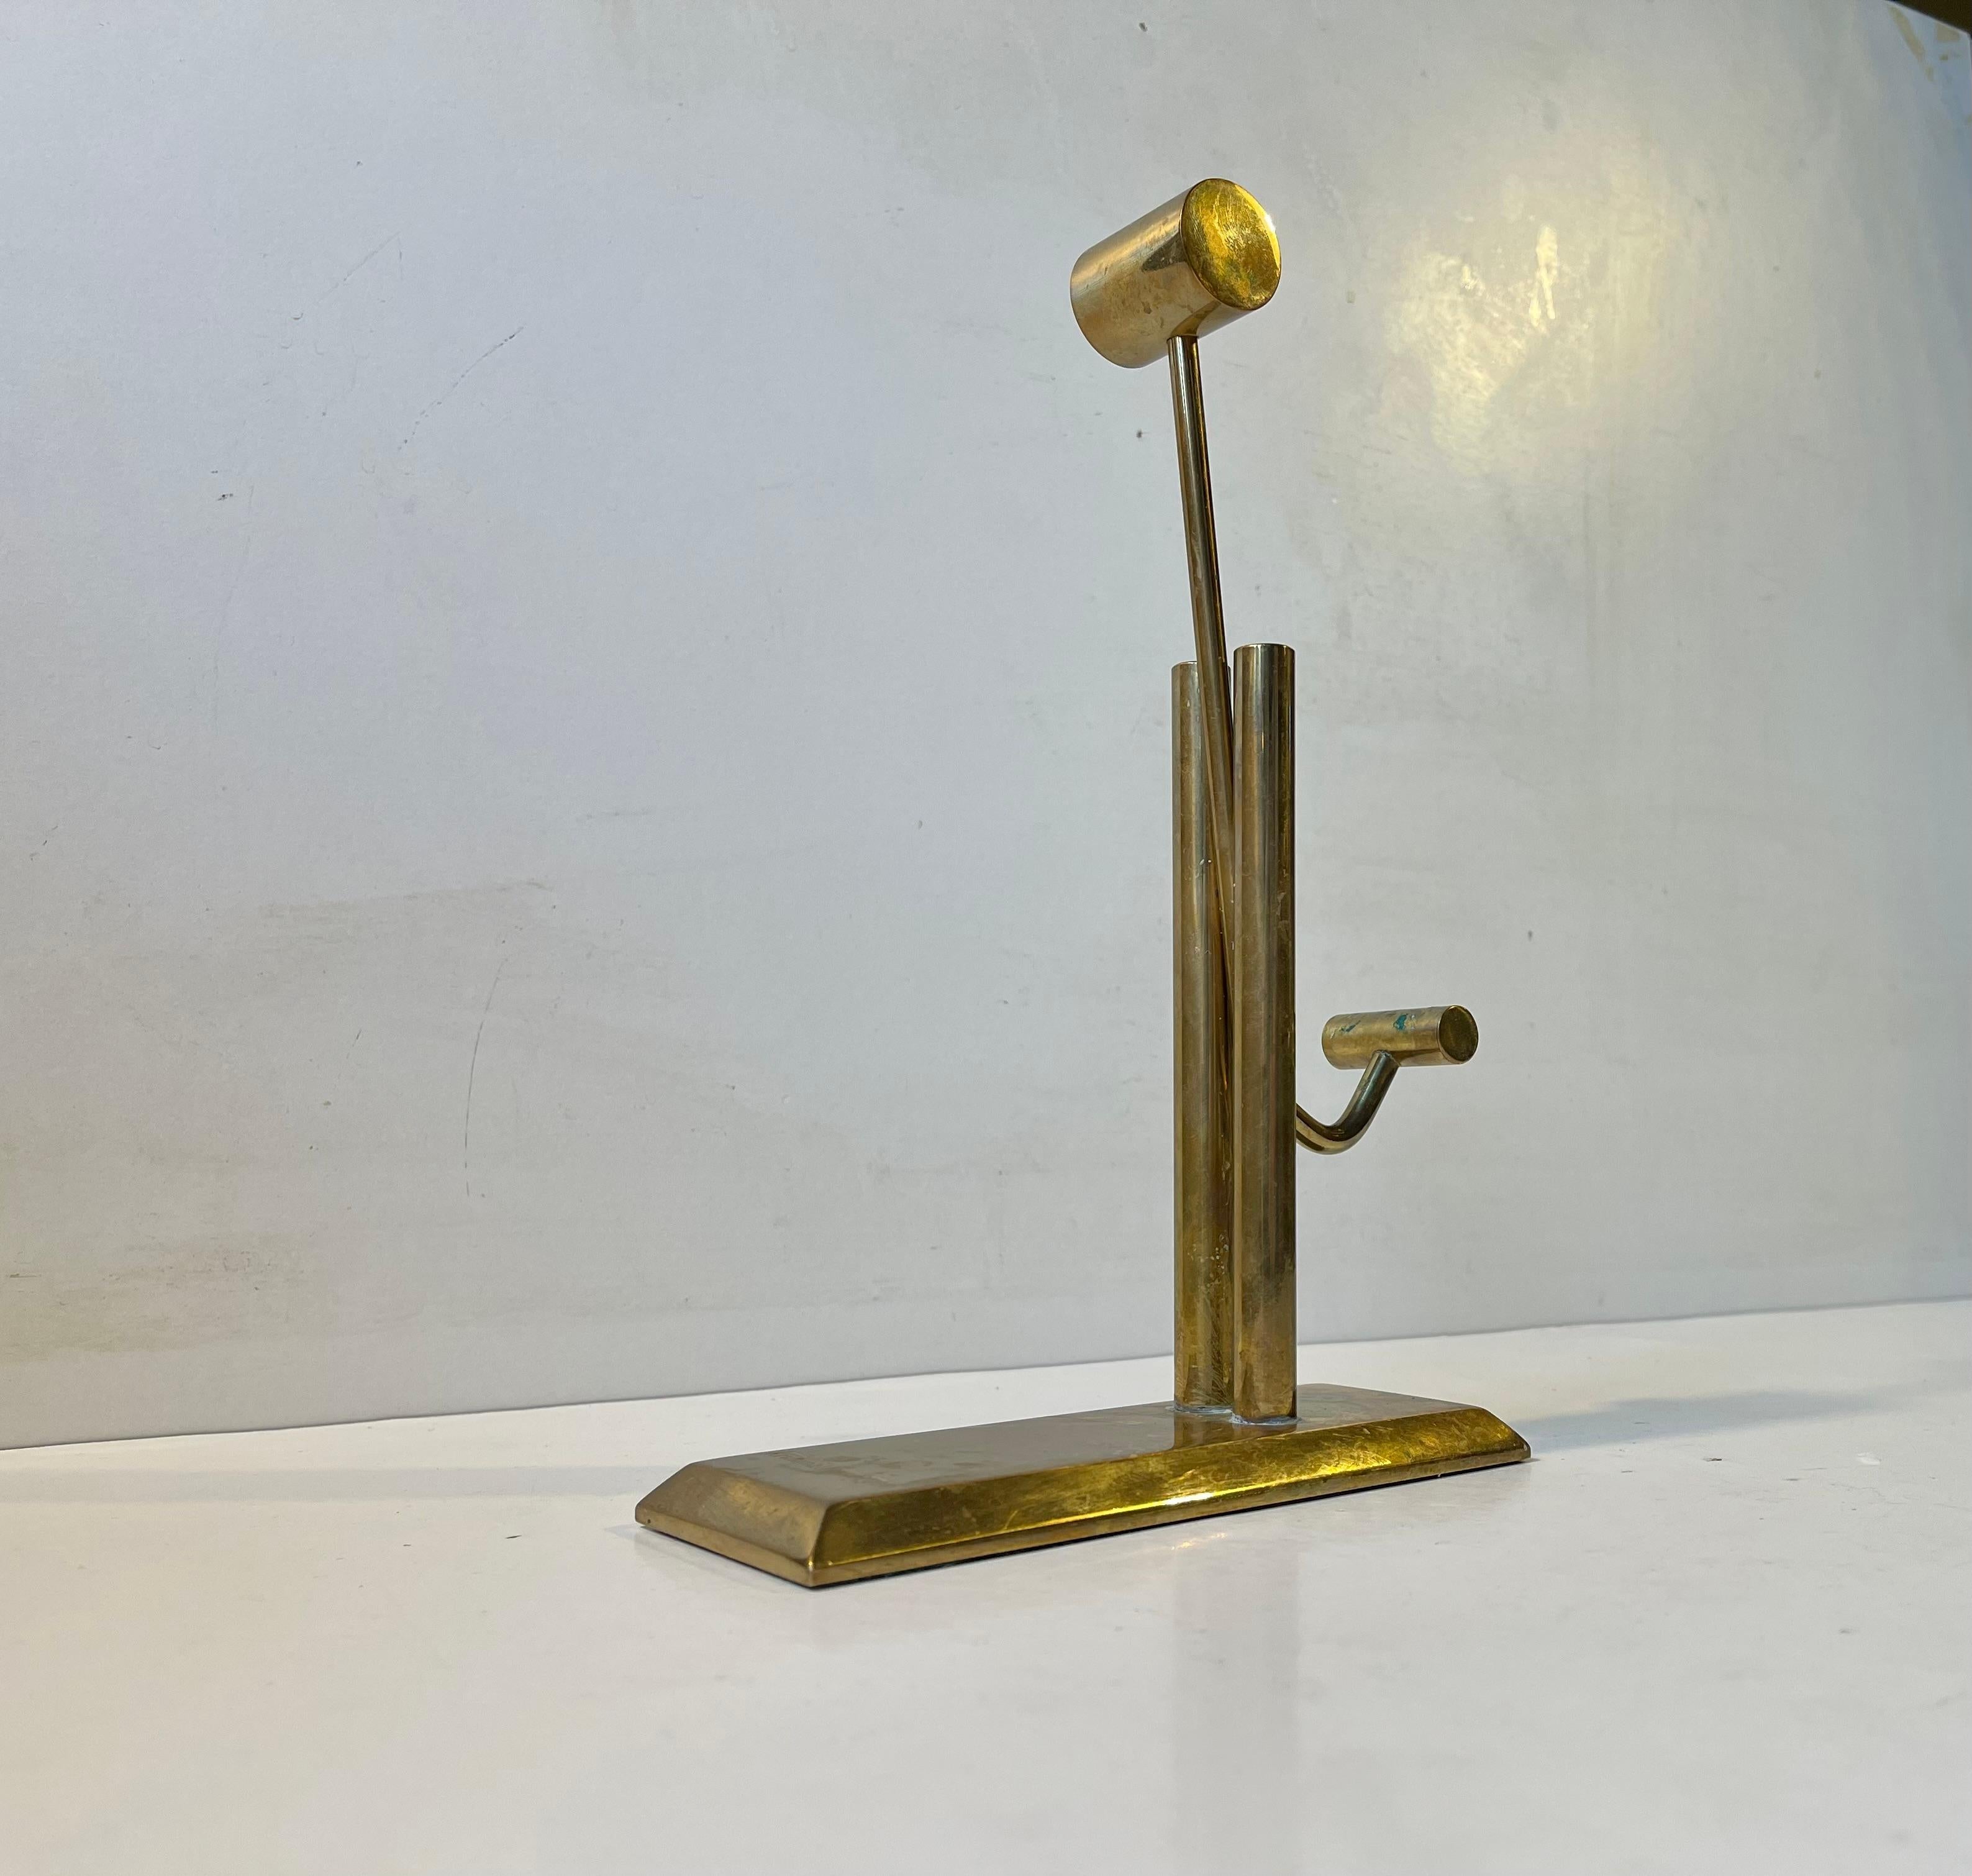 A very well-, heavy and steady made counterweighted paper holder in solid bronze. It resembles an oil pump. Presumably custommade and handed as a gift to an employe of the Danish Correctional Service as a celebration of 25 years in service